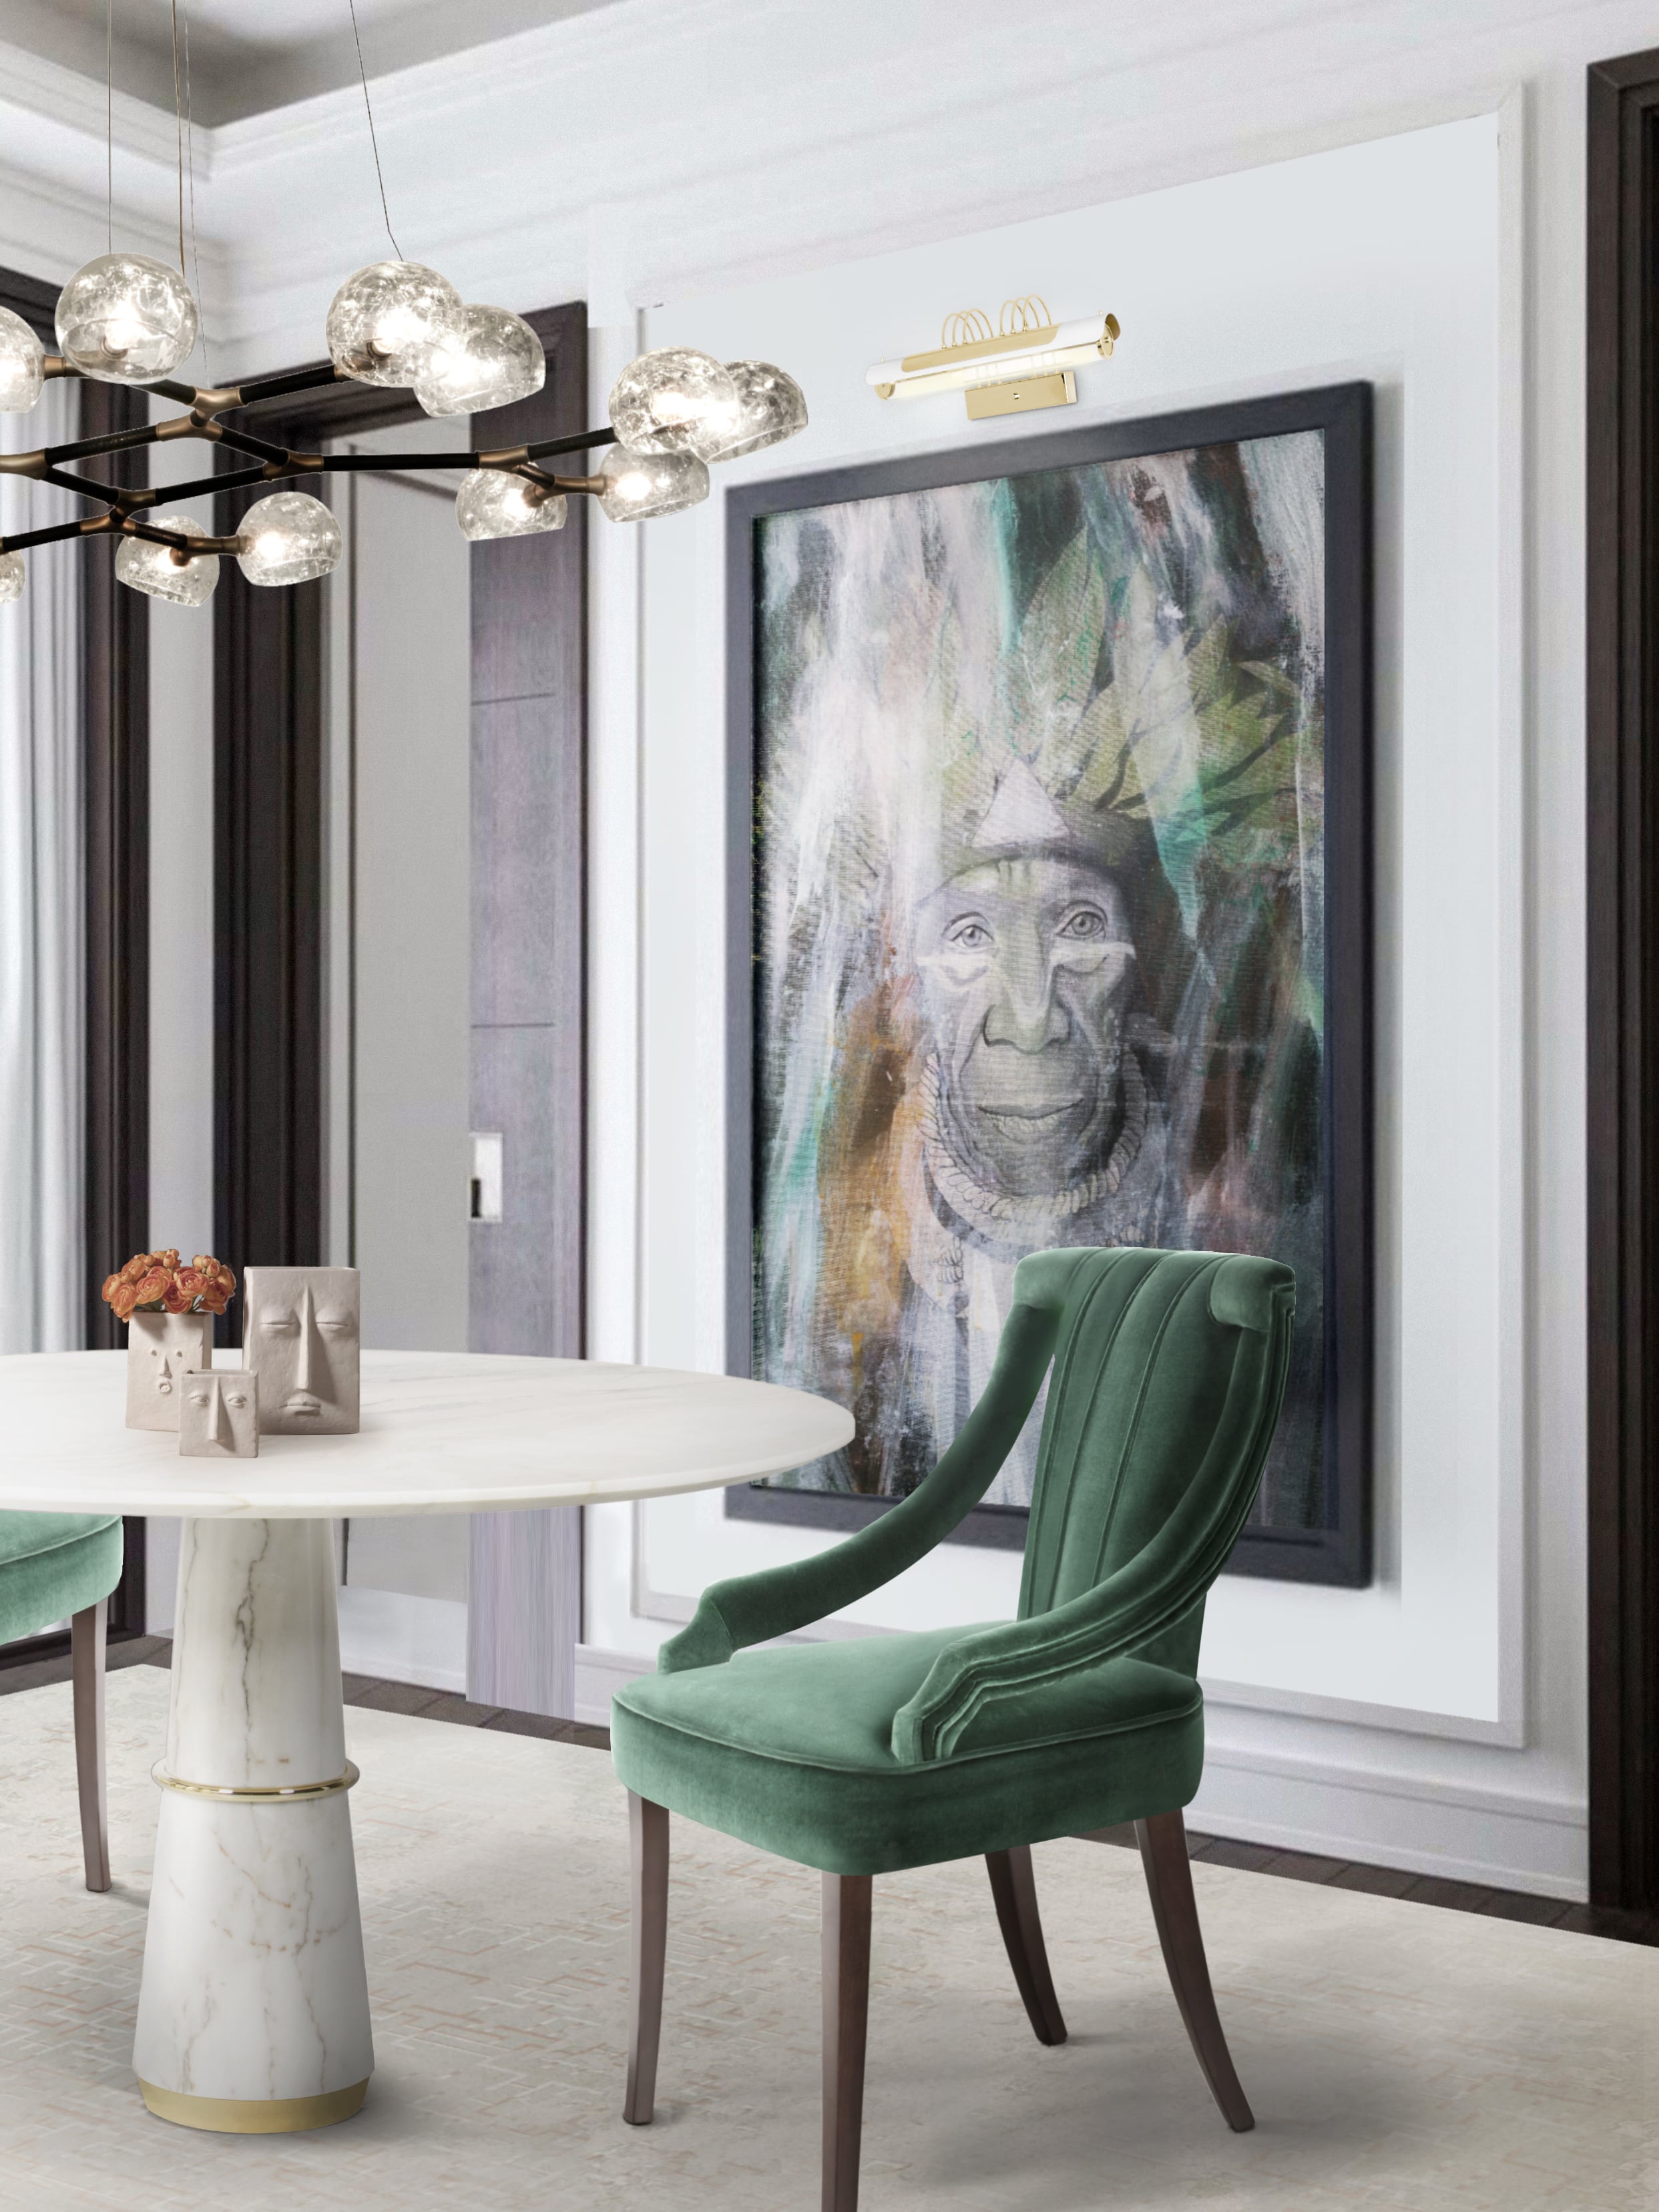 Fascinating and Mesmerizing Dining Room Decor Appealing To Anyone - Home'Society